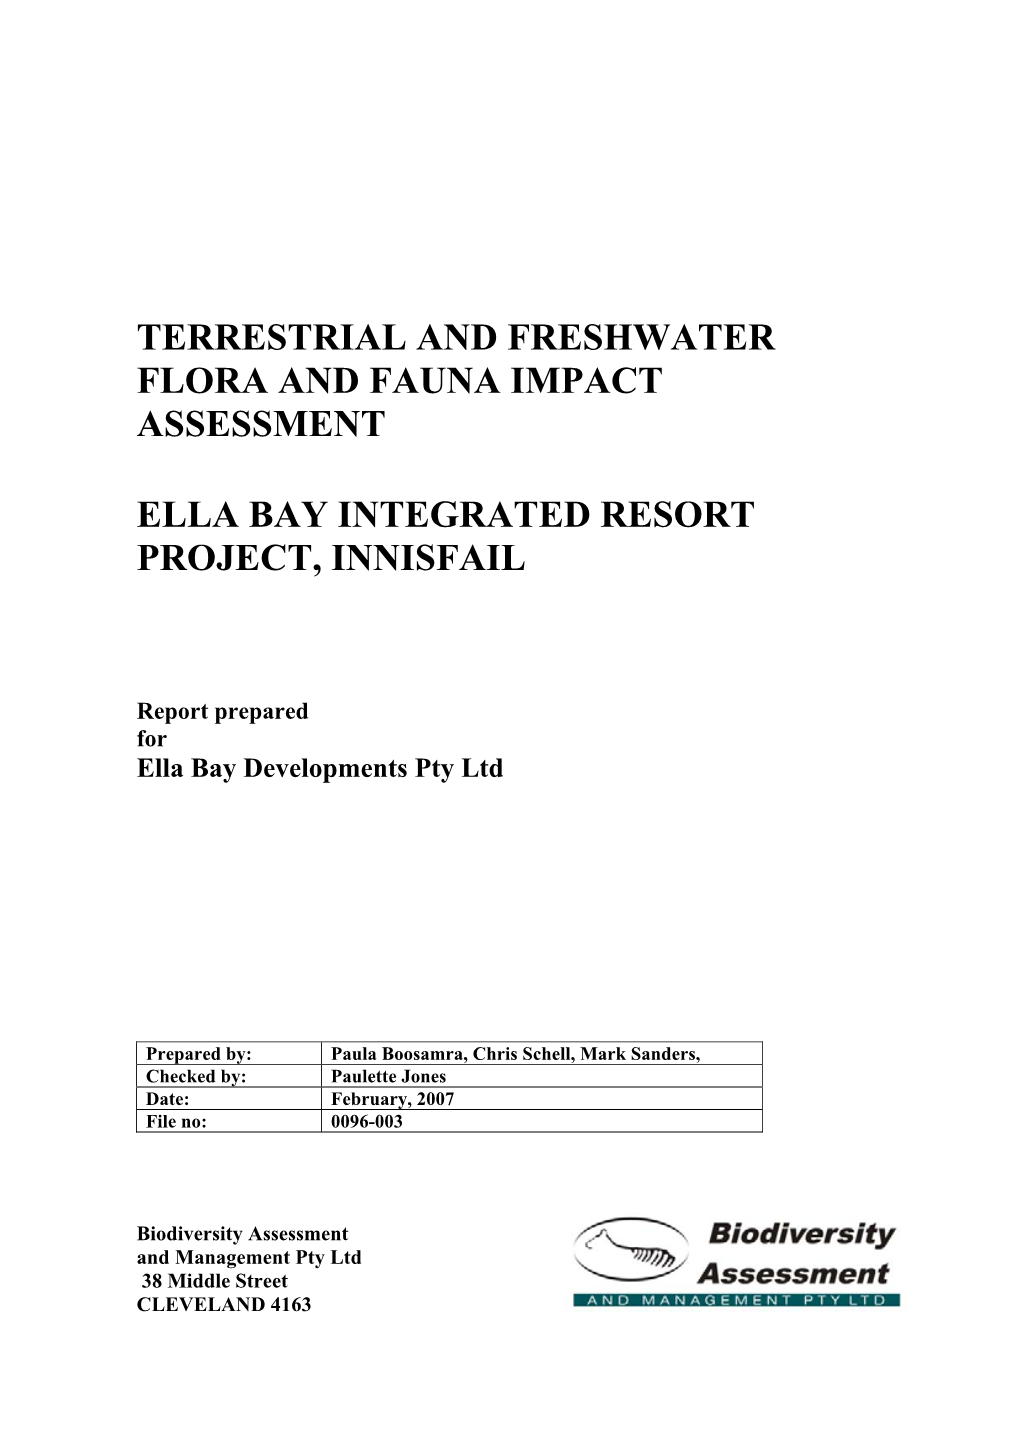 Terrestrial and Freshwater Flora and Fauna Impact Assessment